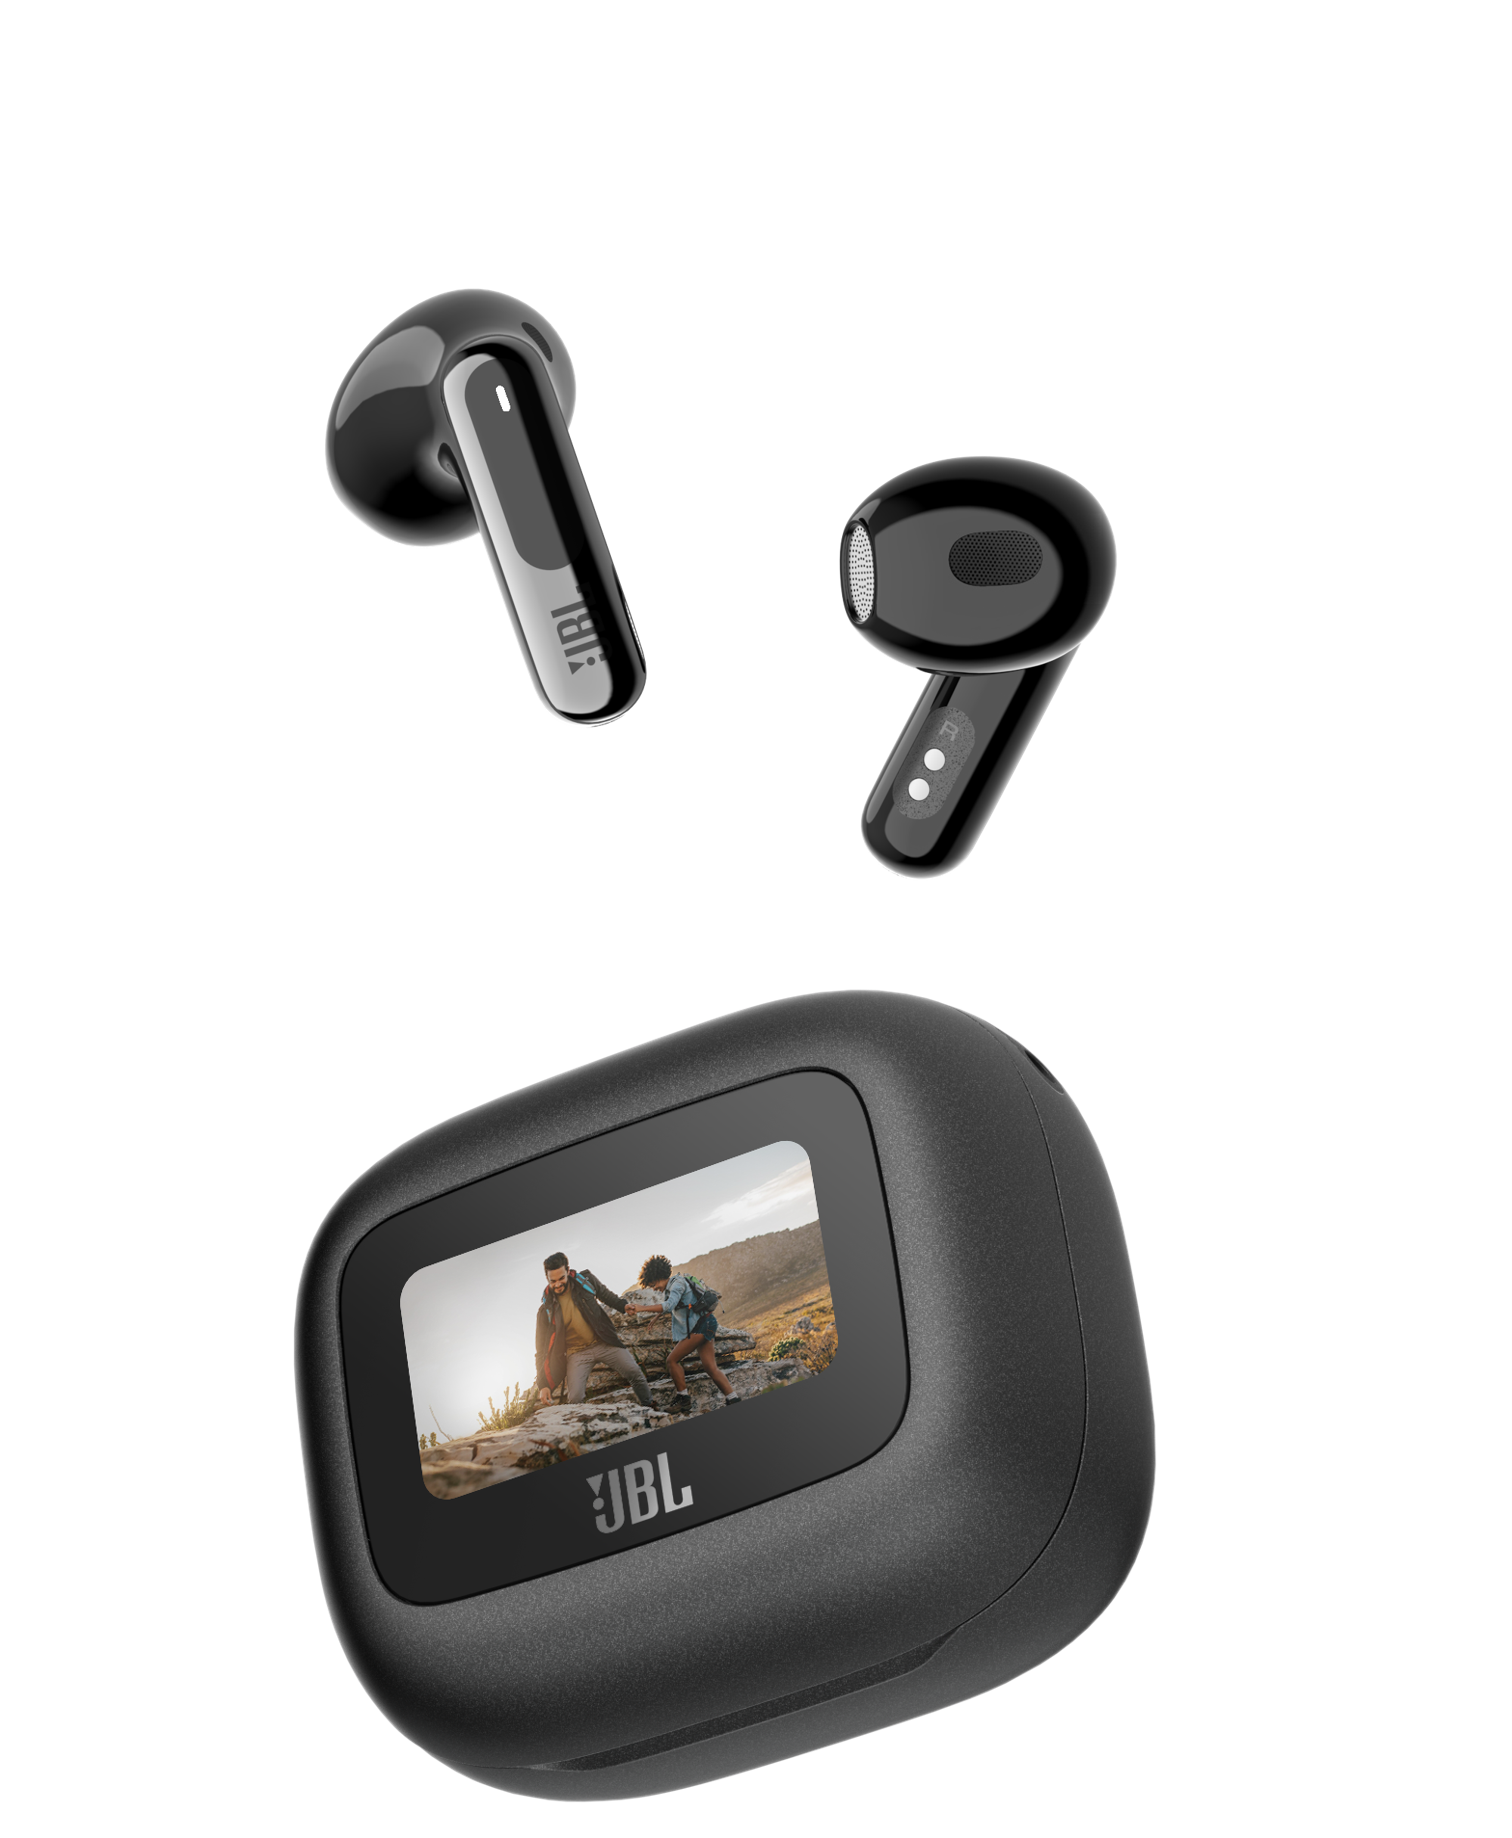 The JBL Live 3 earbuds expand popular touchscreen case with three earbud  shapes